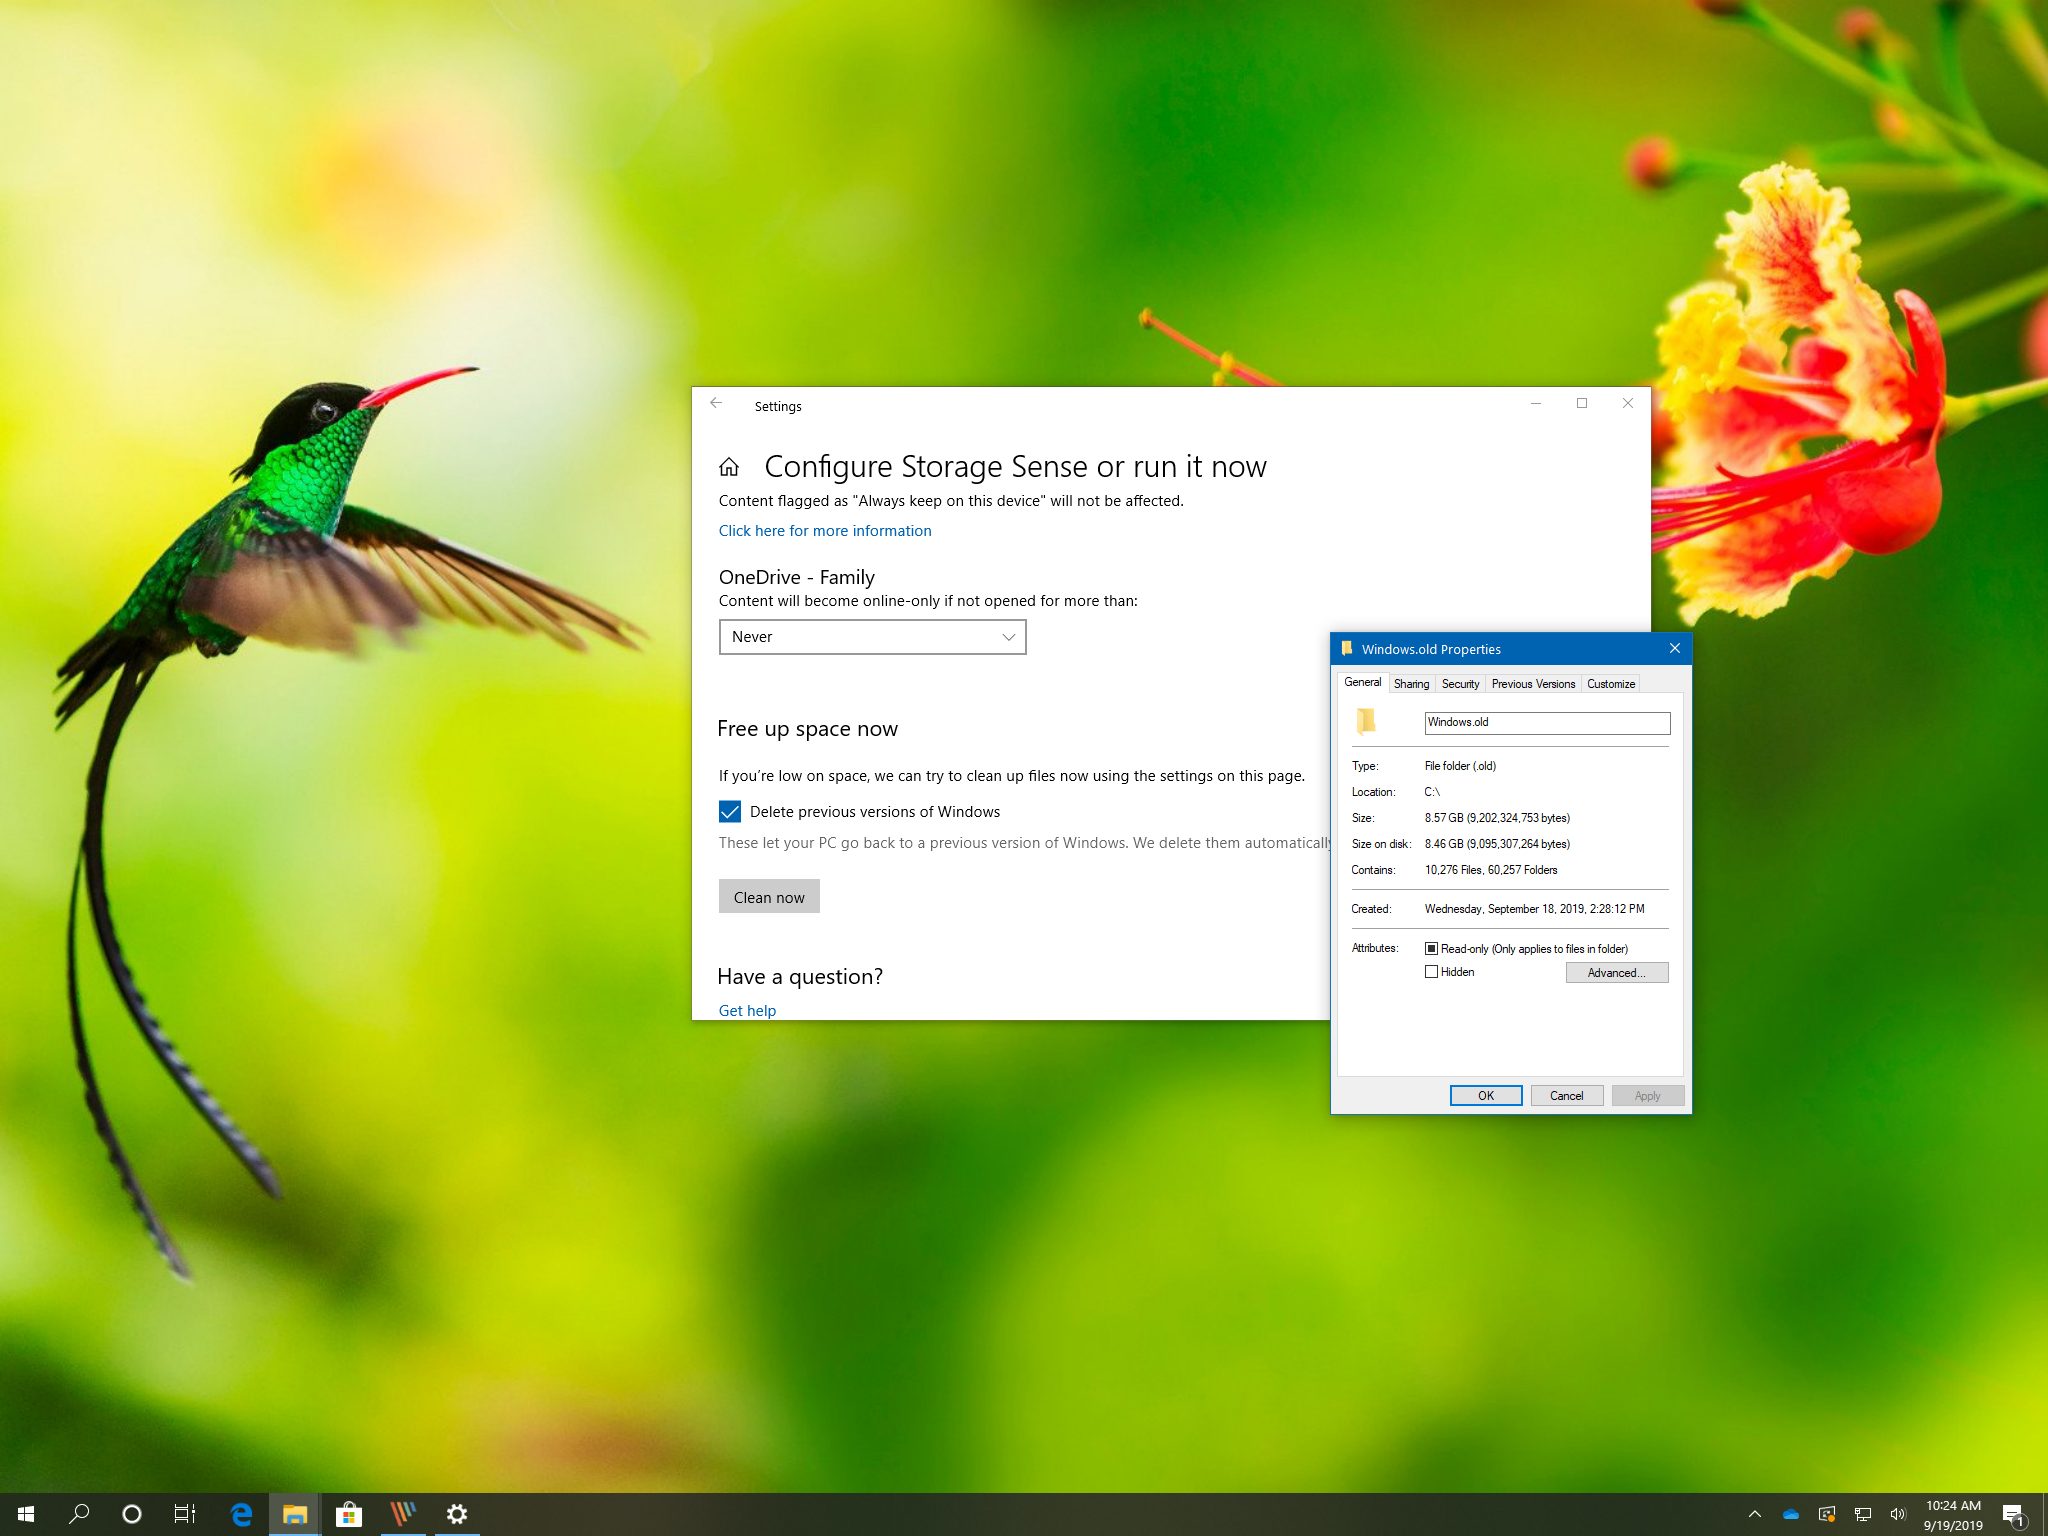 freeup-space-after-windows-10-1909_19h2-update.jpg